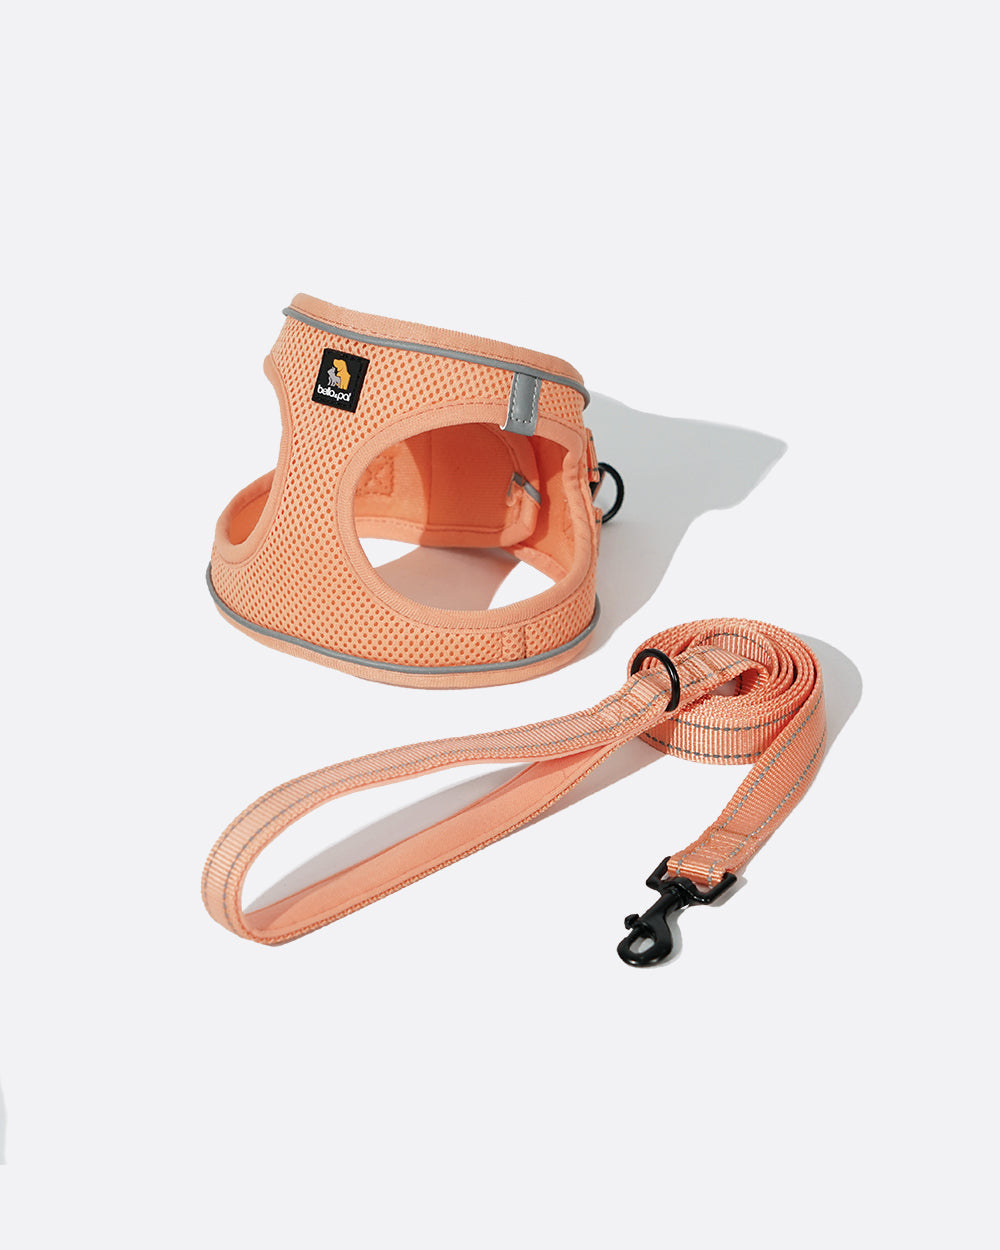 OxyMesh Velcro Step-in Harness and Leash Set - Peach Pink